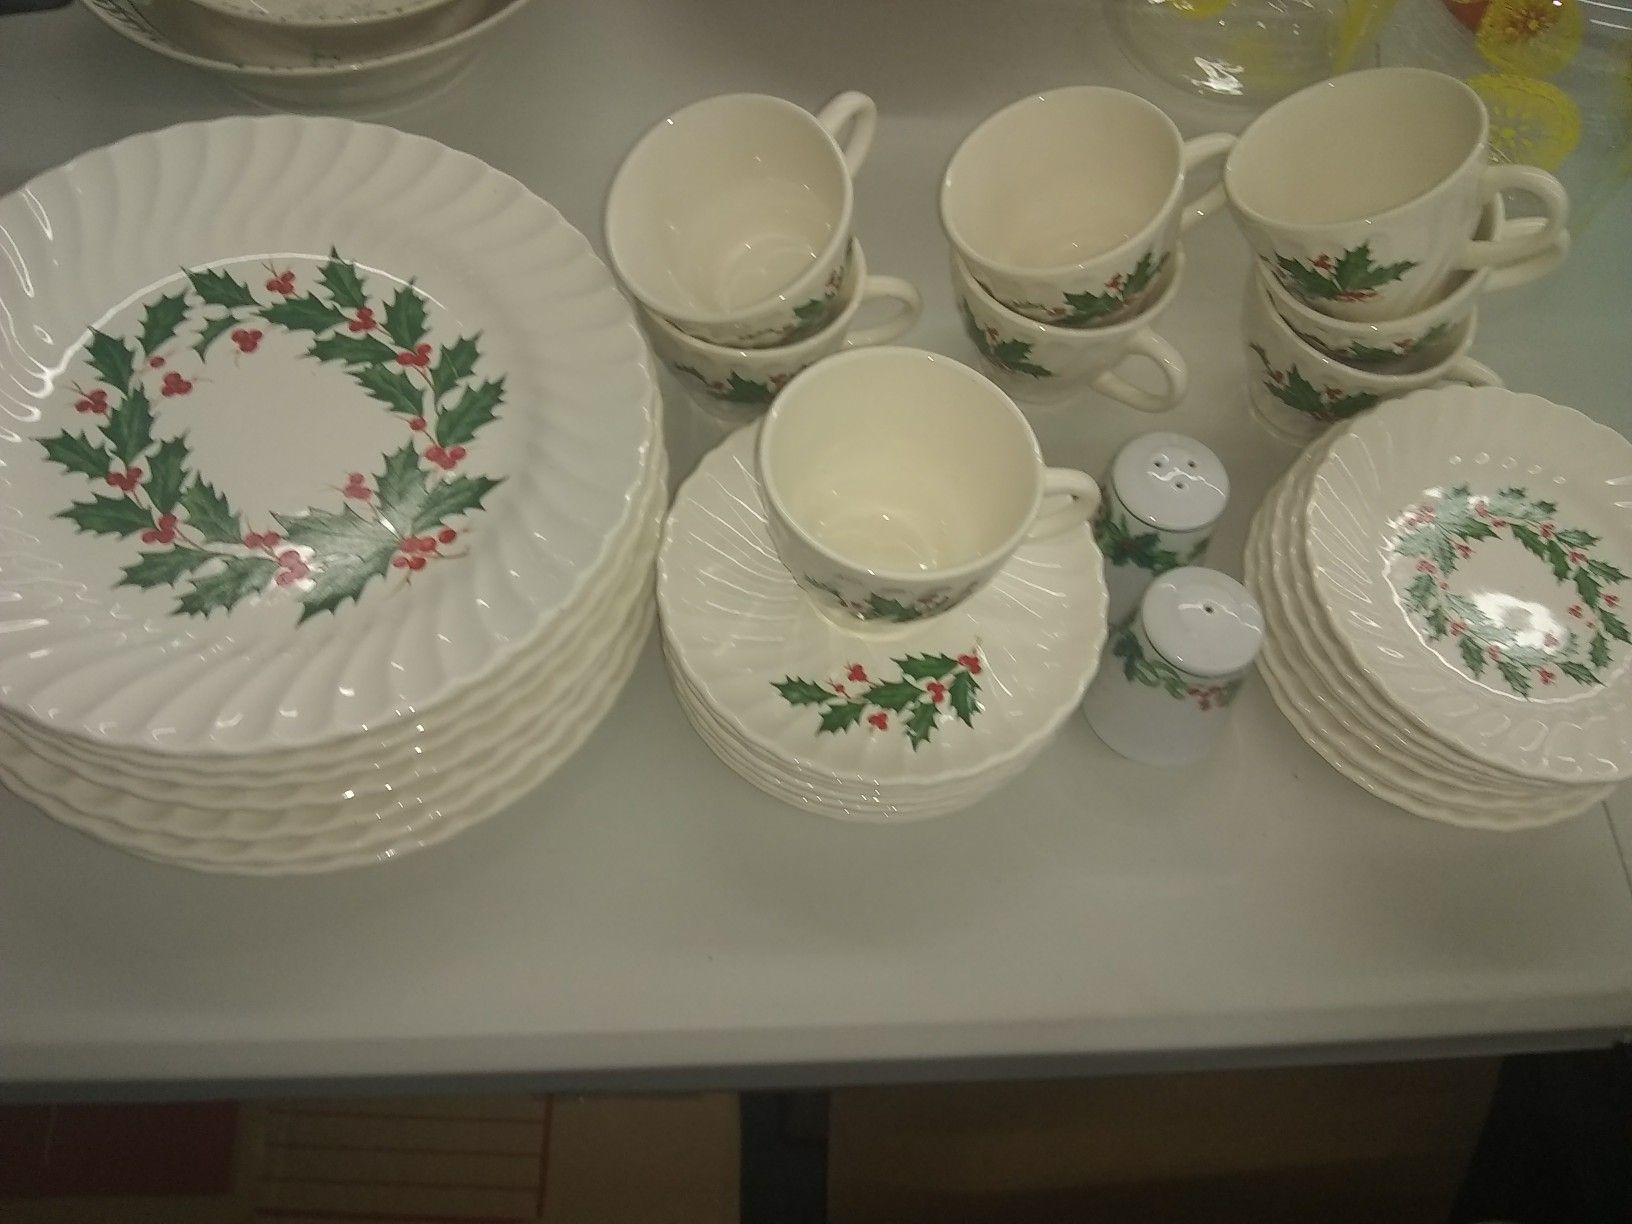 Vintage Holly & Berry Christmas Dishes - Swirl Design